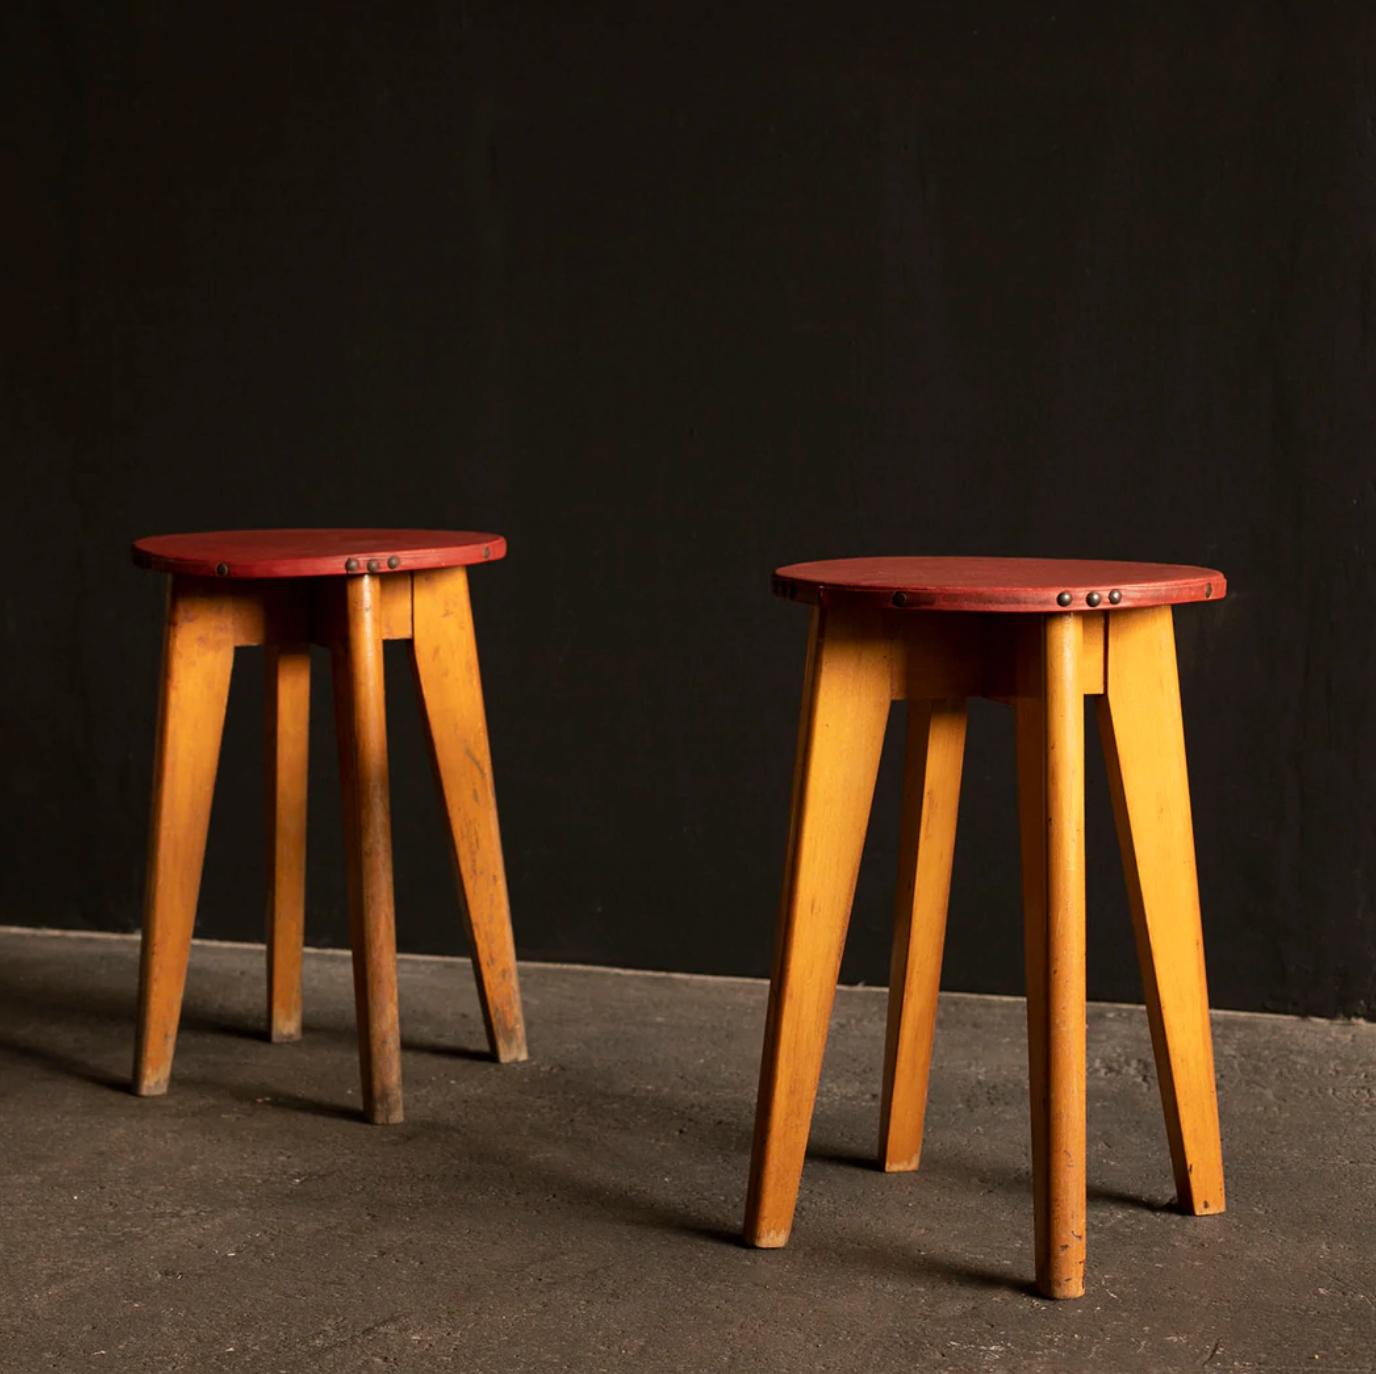 Item No. 31-57

1980s / Belgium
Size W350 D350 H510 mm 

Vintage stools From Belgium, circa 1980's

This beautiful set of stools features mid-century period. Only minimal cleaning has been done to preserve the original appearance.